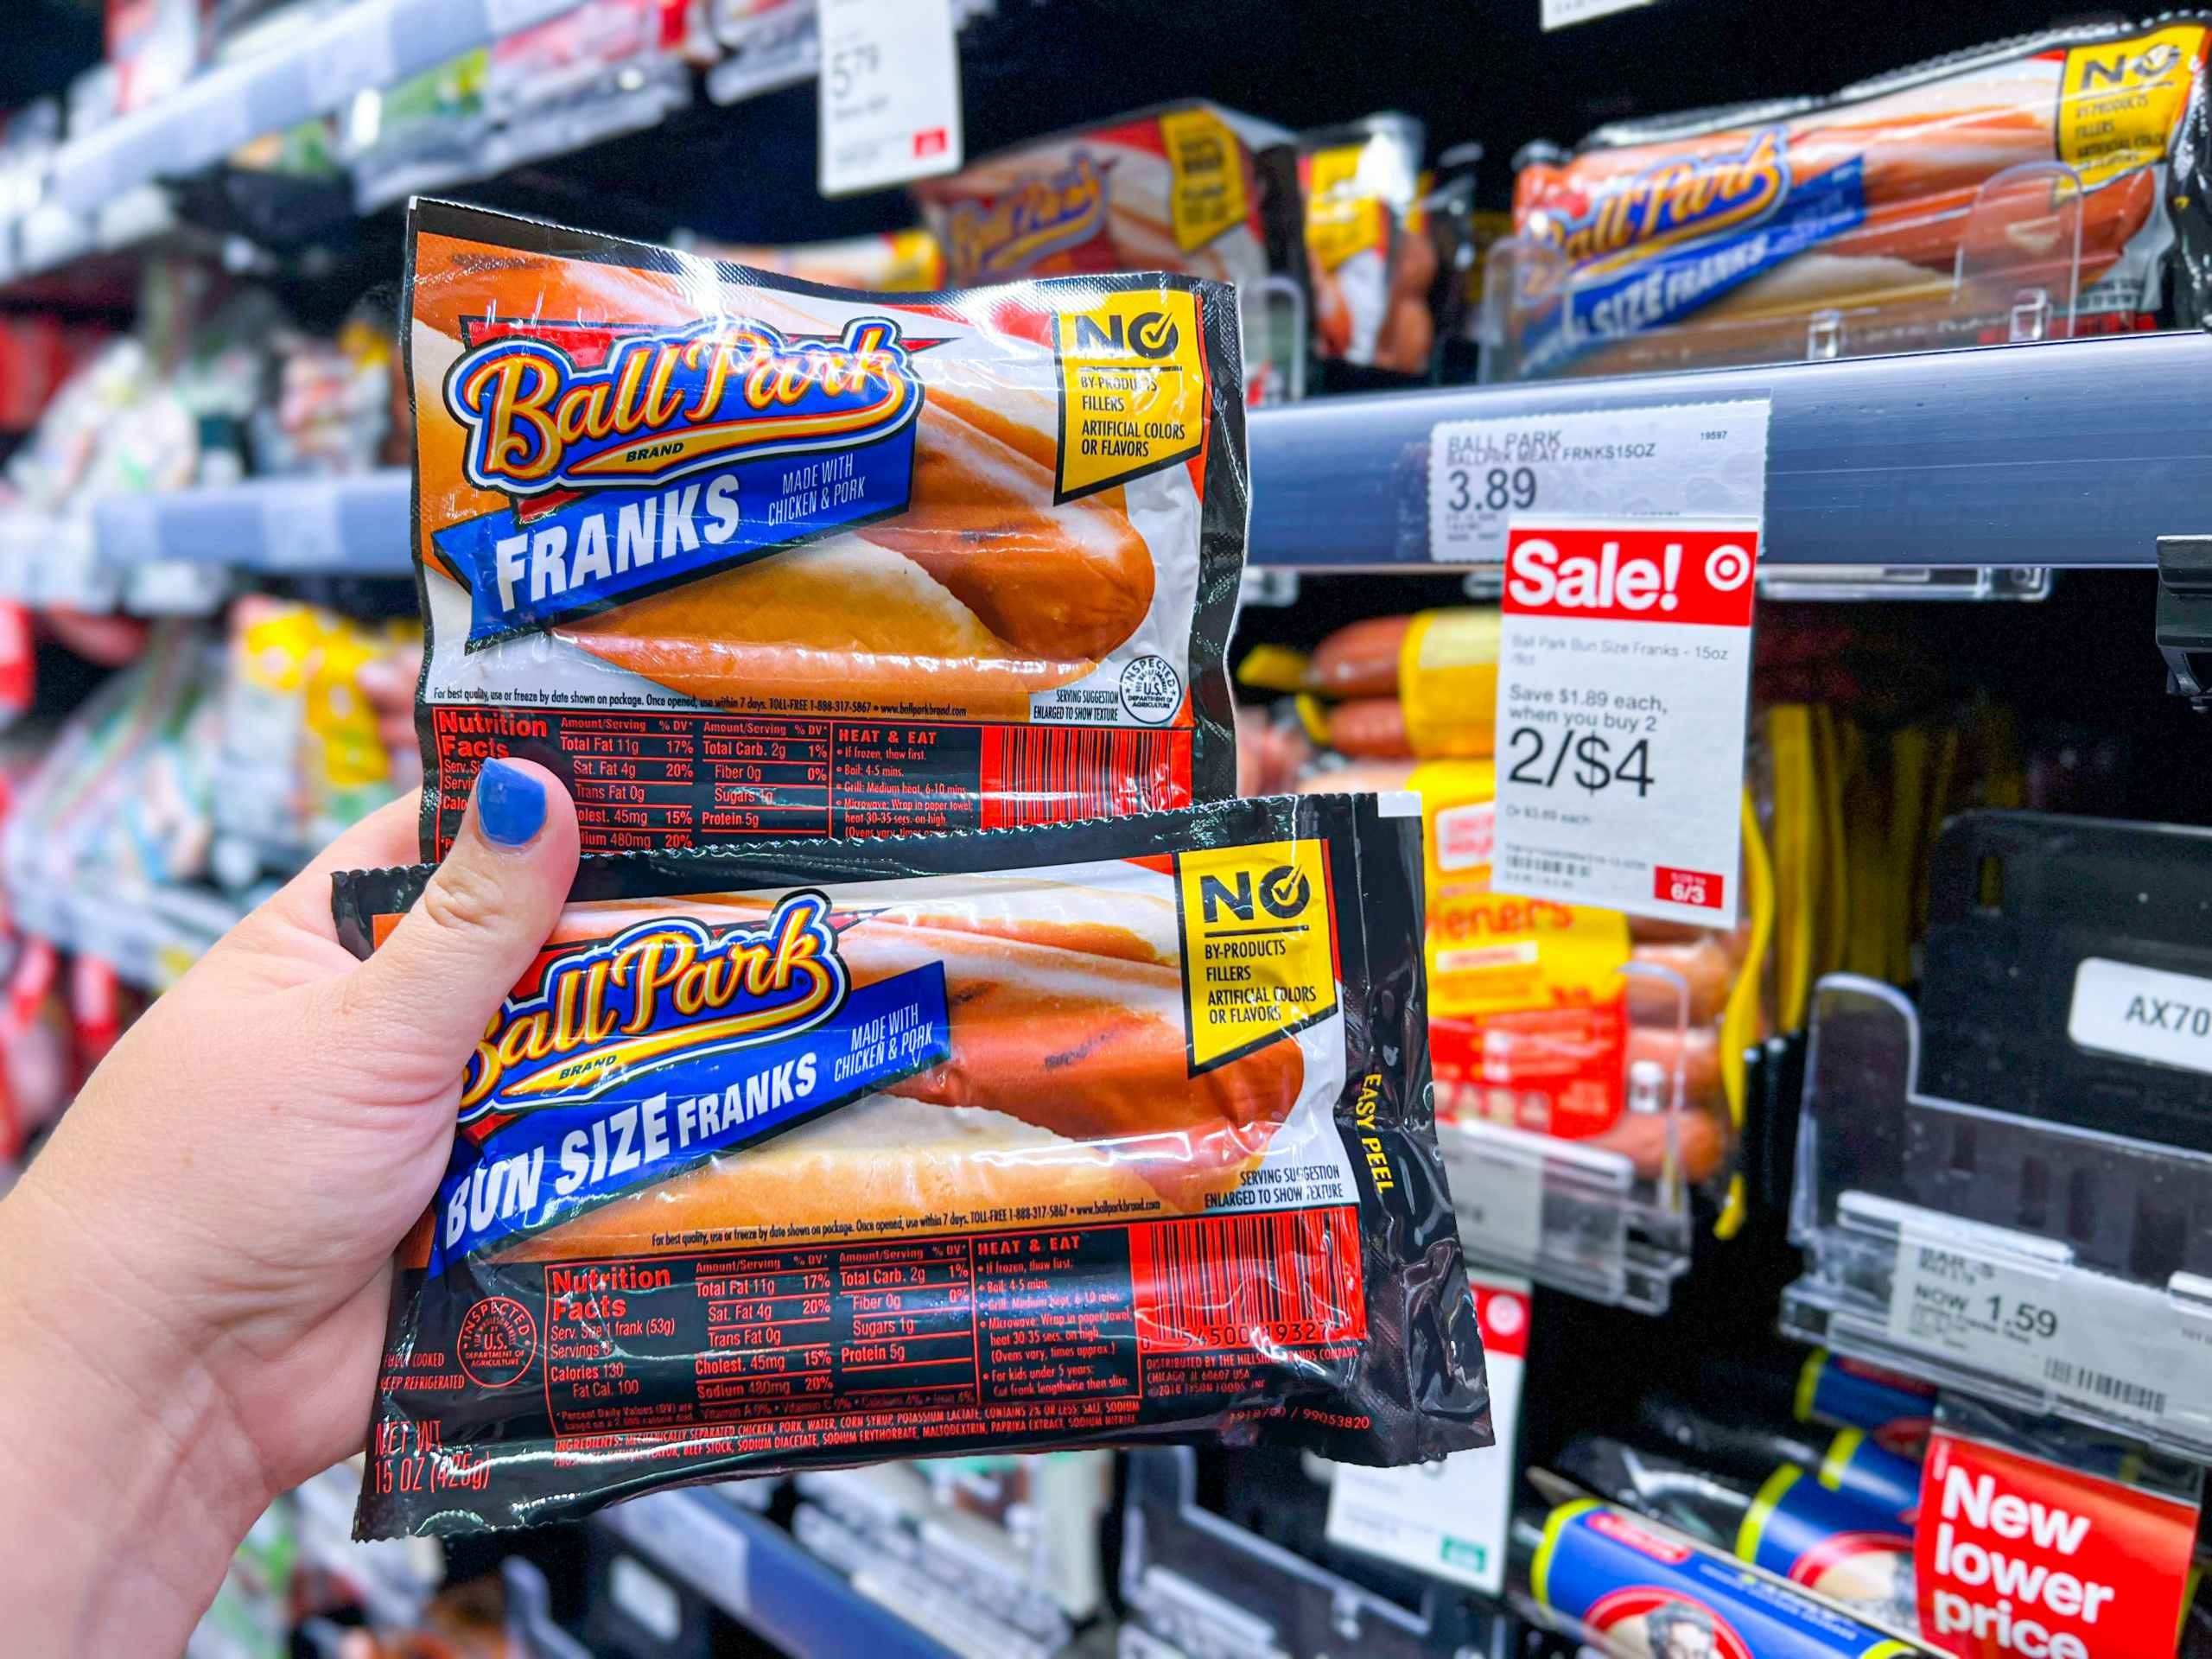 hand holding two packs of Ball Park Franks next to sales tag